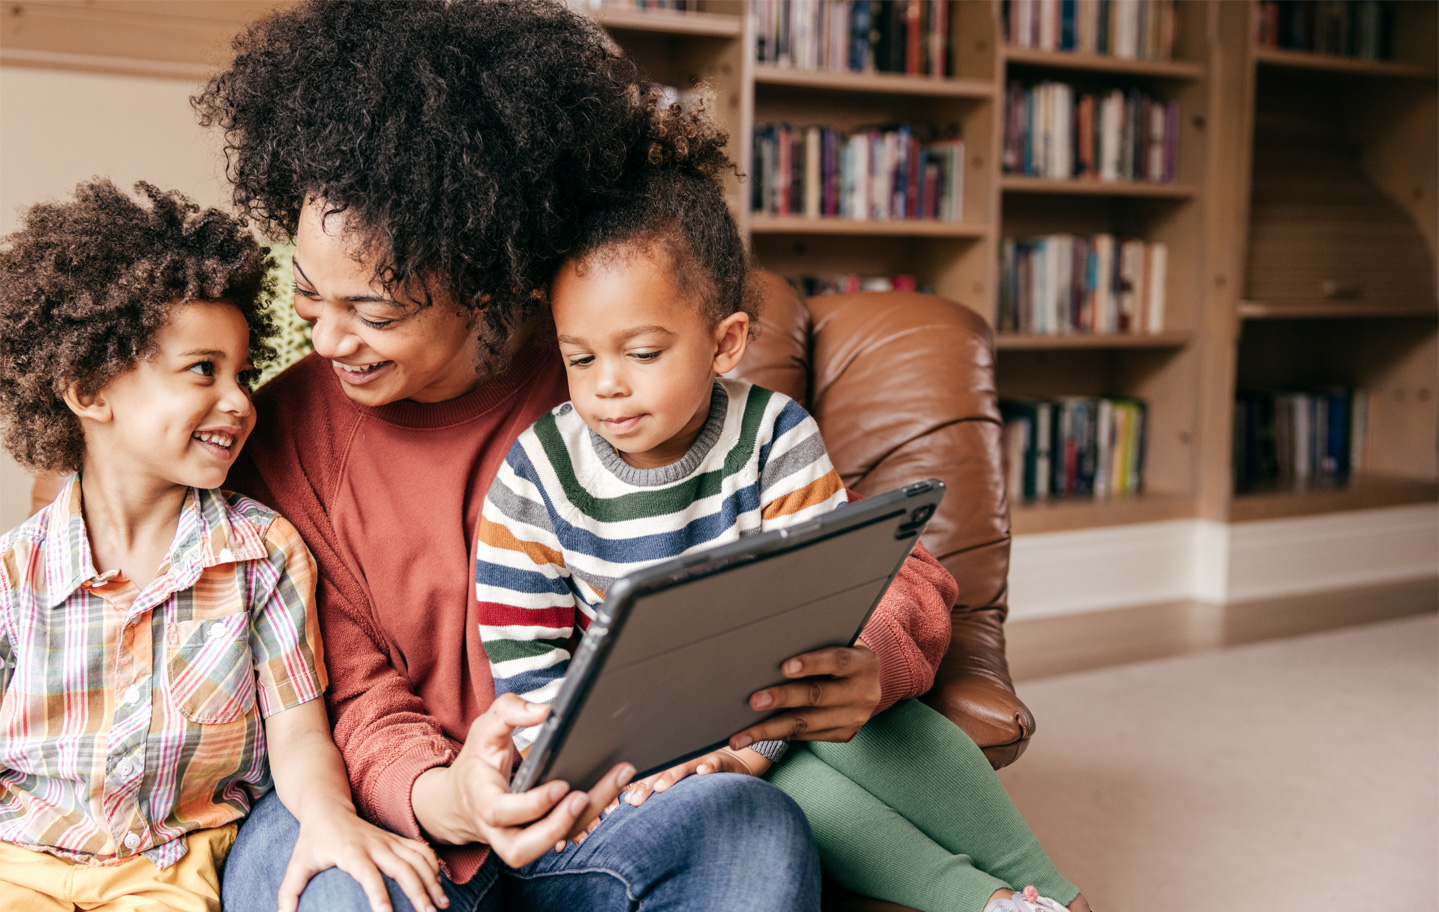 A Black woman smiles and holds a tablet as two Black children sit in her lap, bookcase in the background.